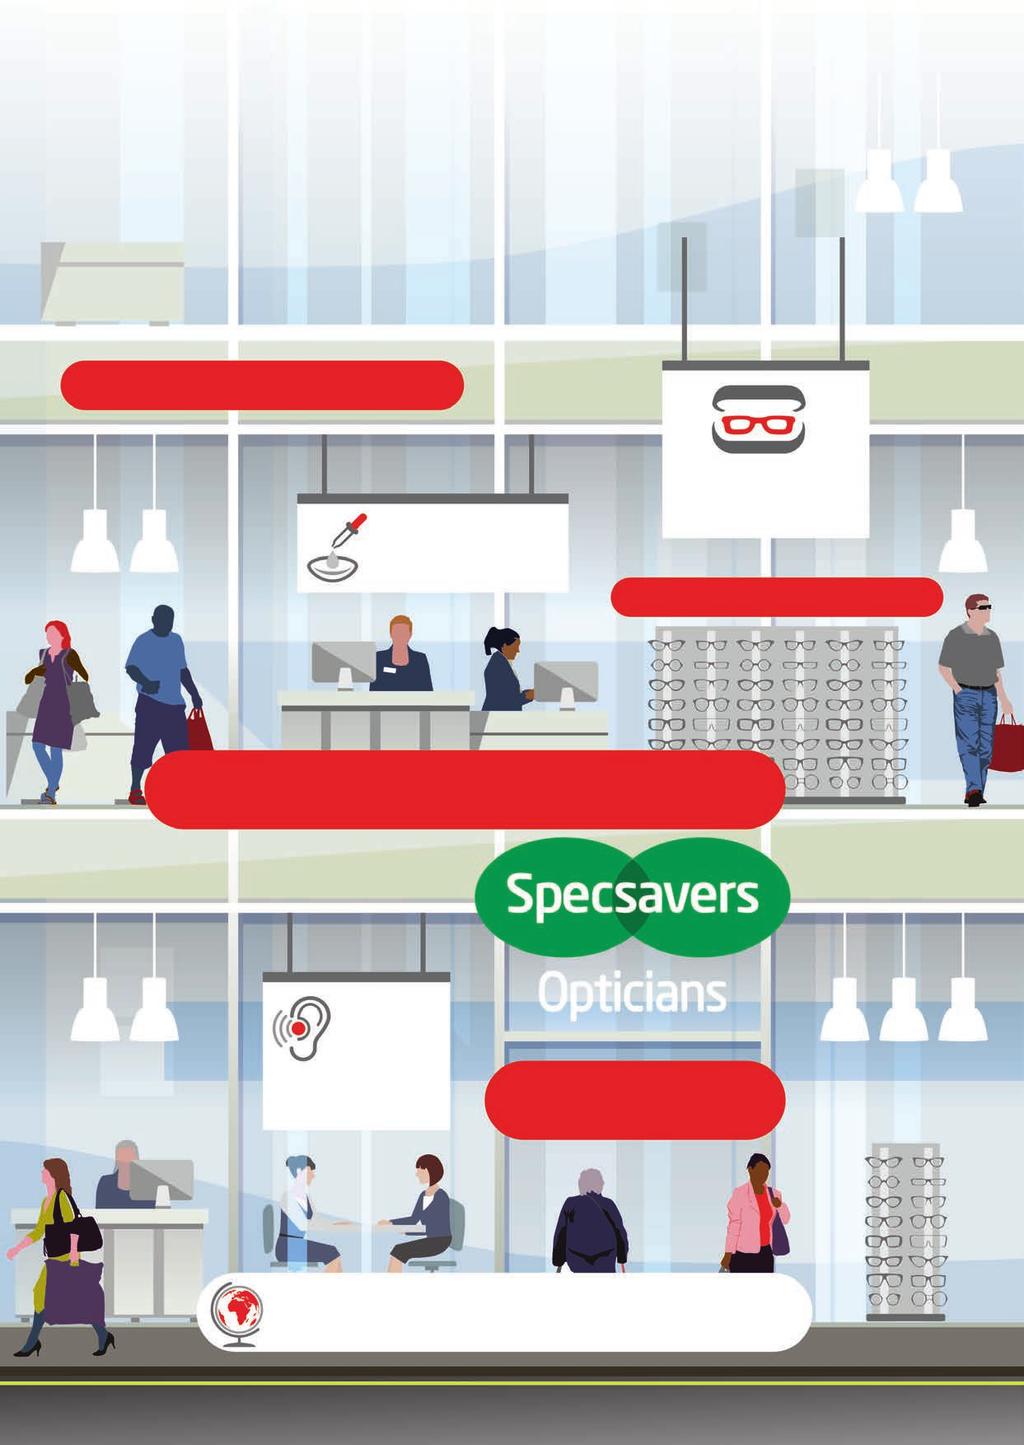 At a glance: SPECSAVERS AND STANDARDS SPECSAVERS HAS: 31 million customers Sold 374 million contact lenses Sold 17.